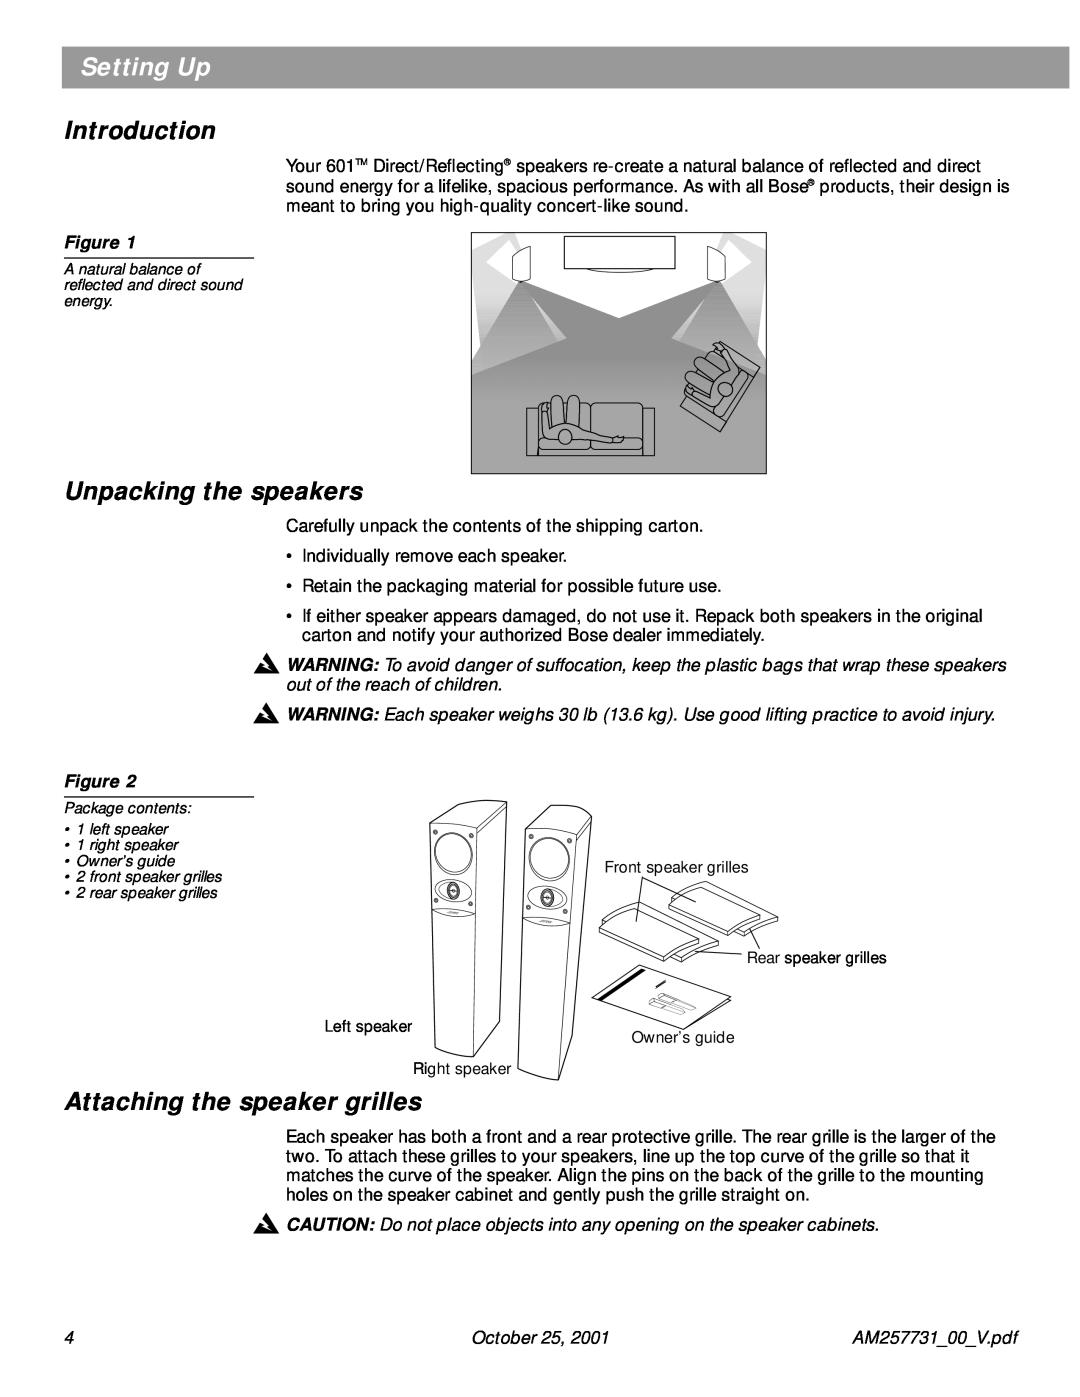 Bose 601TM manual Setting Up, Introduction, Unpacking the speakers, Attaching the speaker grilles, October 